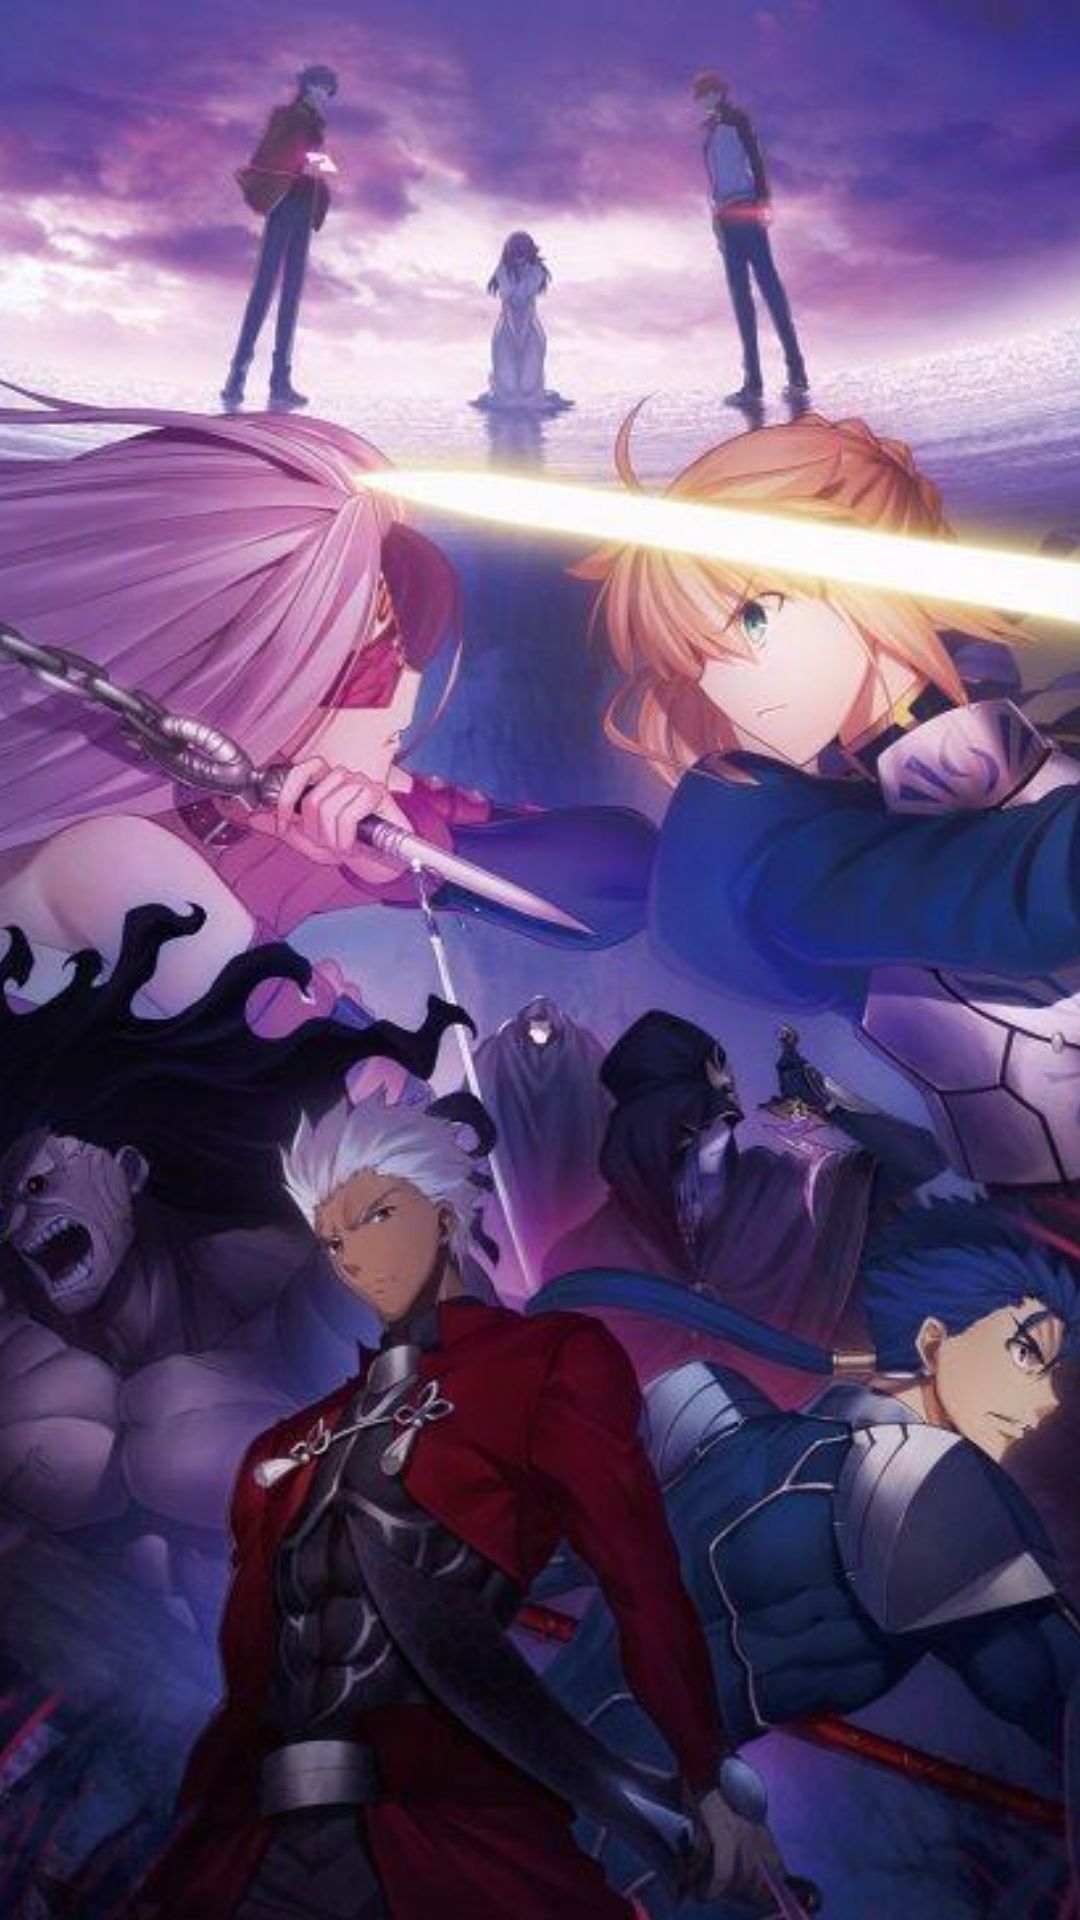 Fate Series Wallpapers Top 35 Best Fate Anime Backgrounds Download